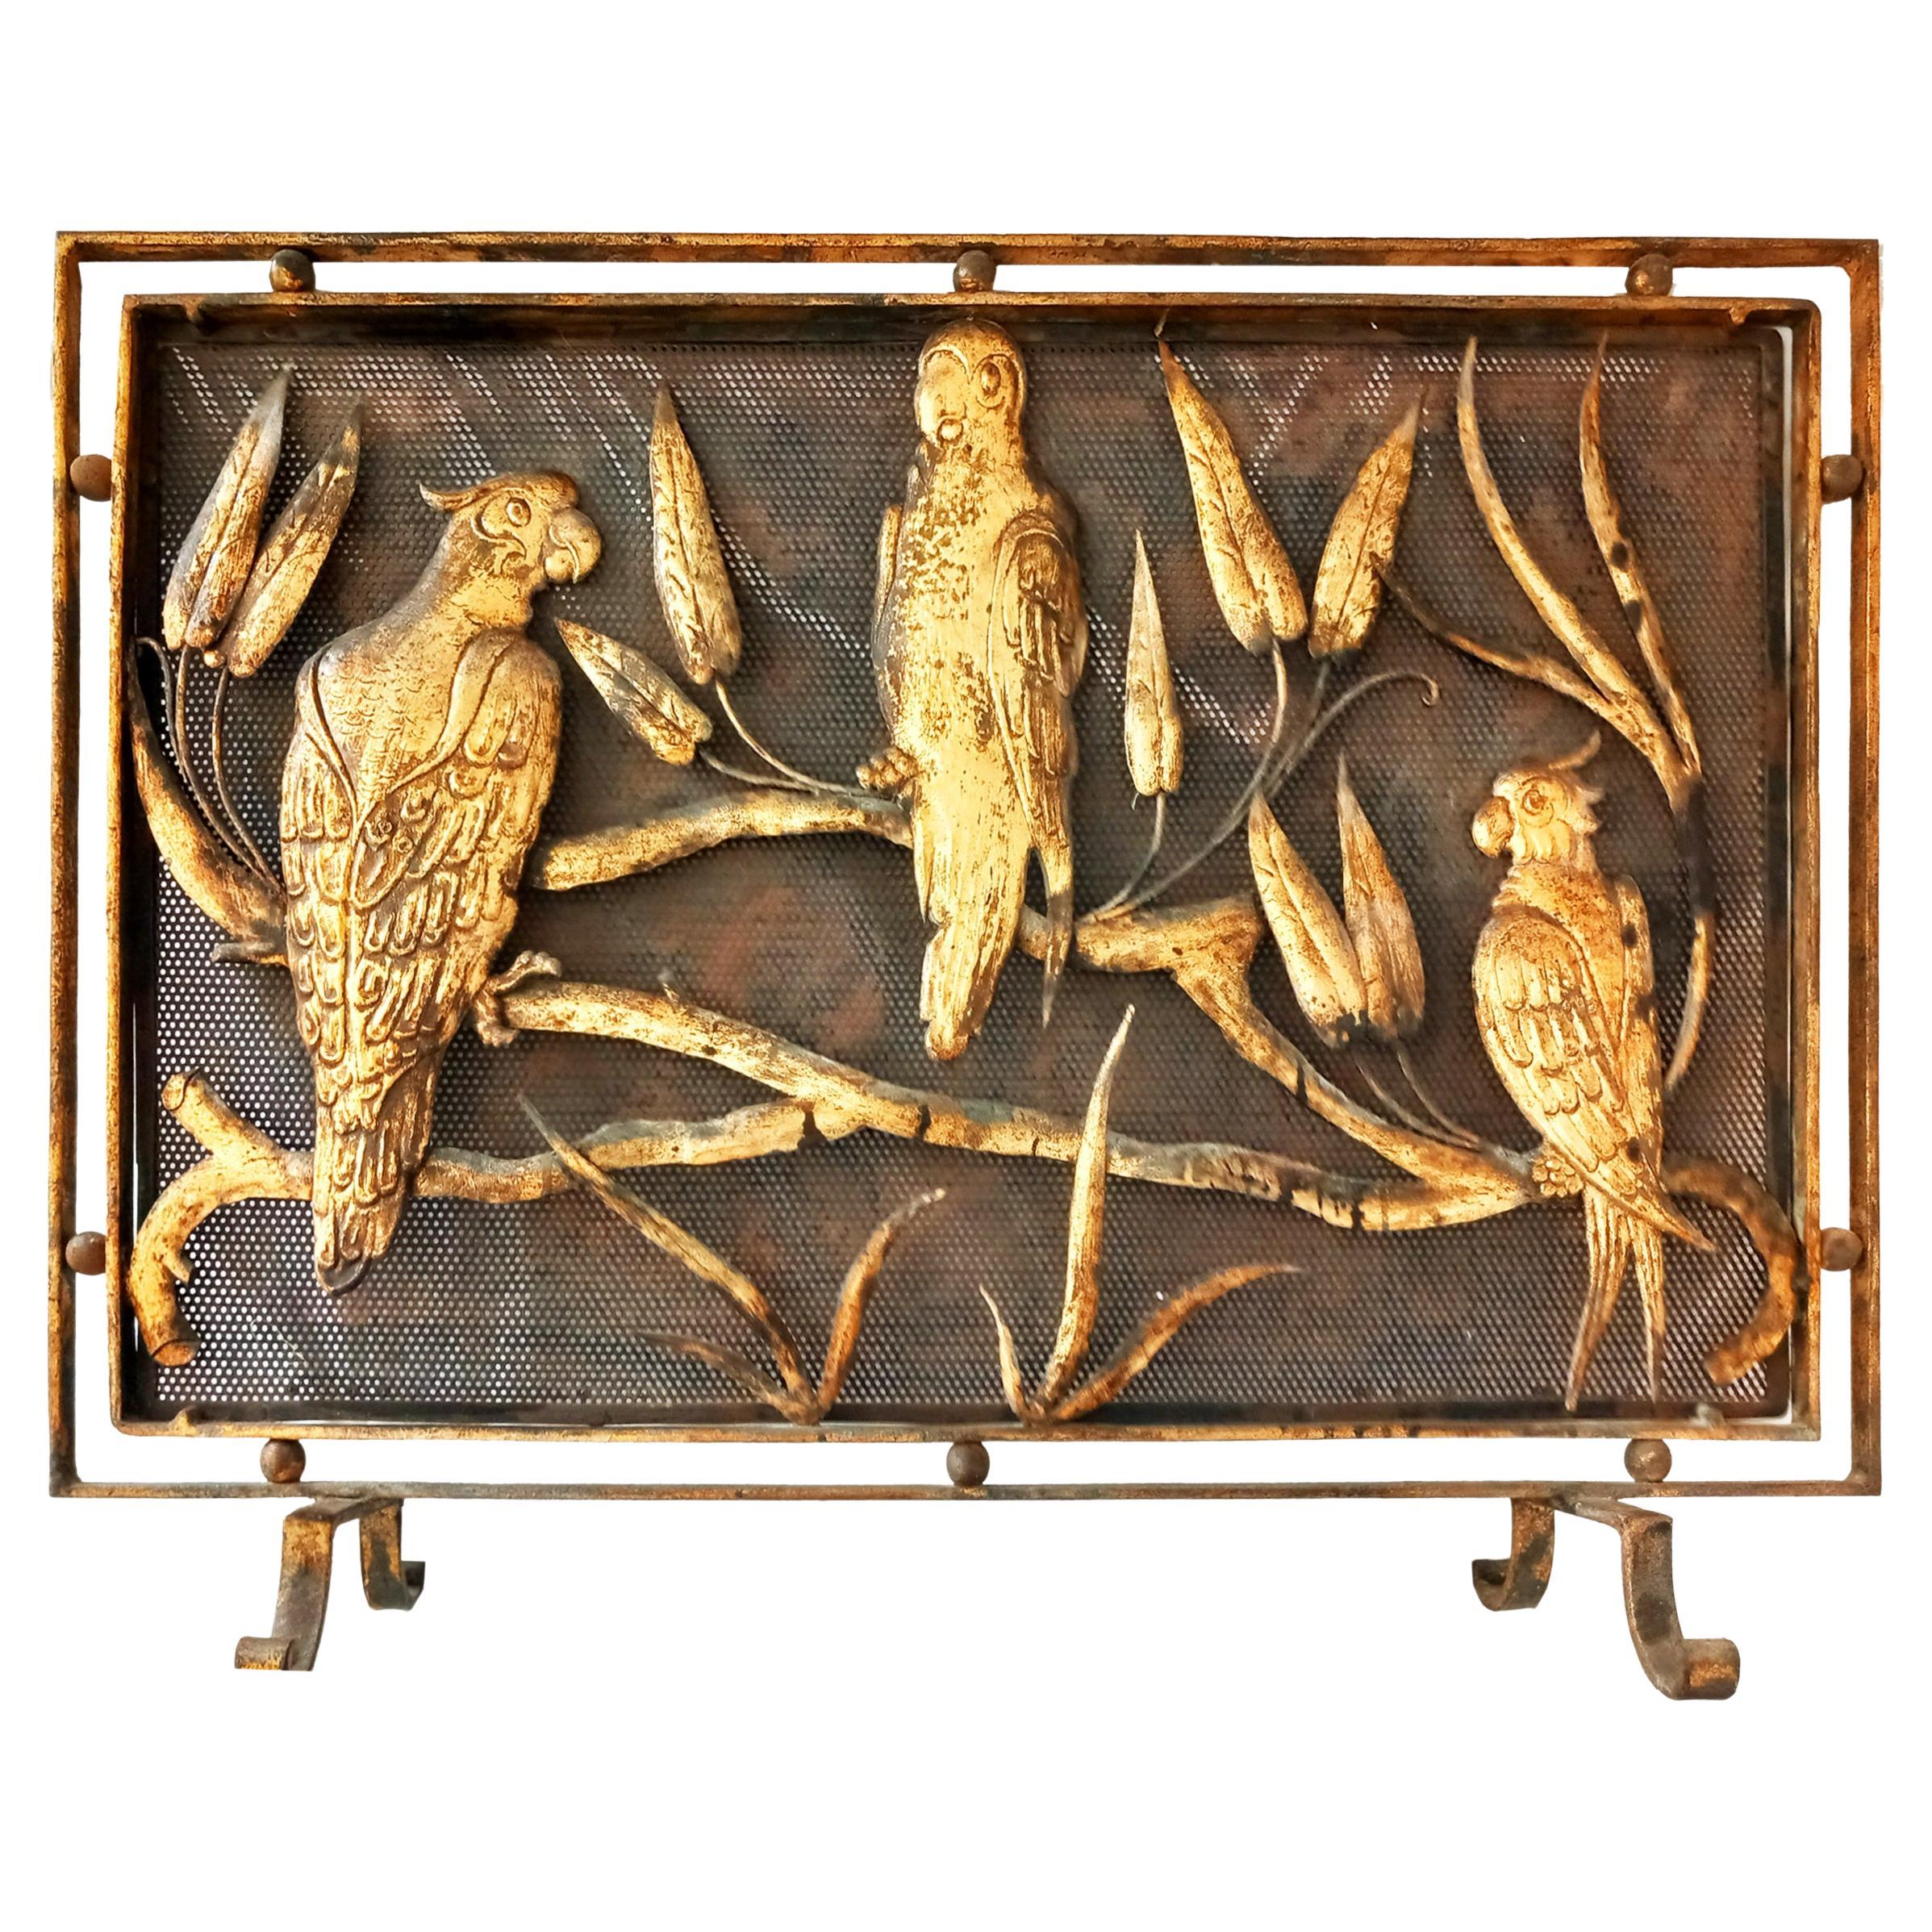 Fire Screen Wrought Iron Whit Parrots The Jungle Exotic, Spain 19th/18th Century